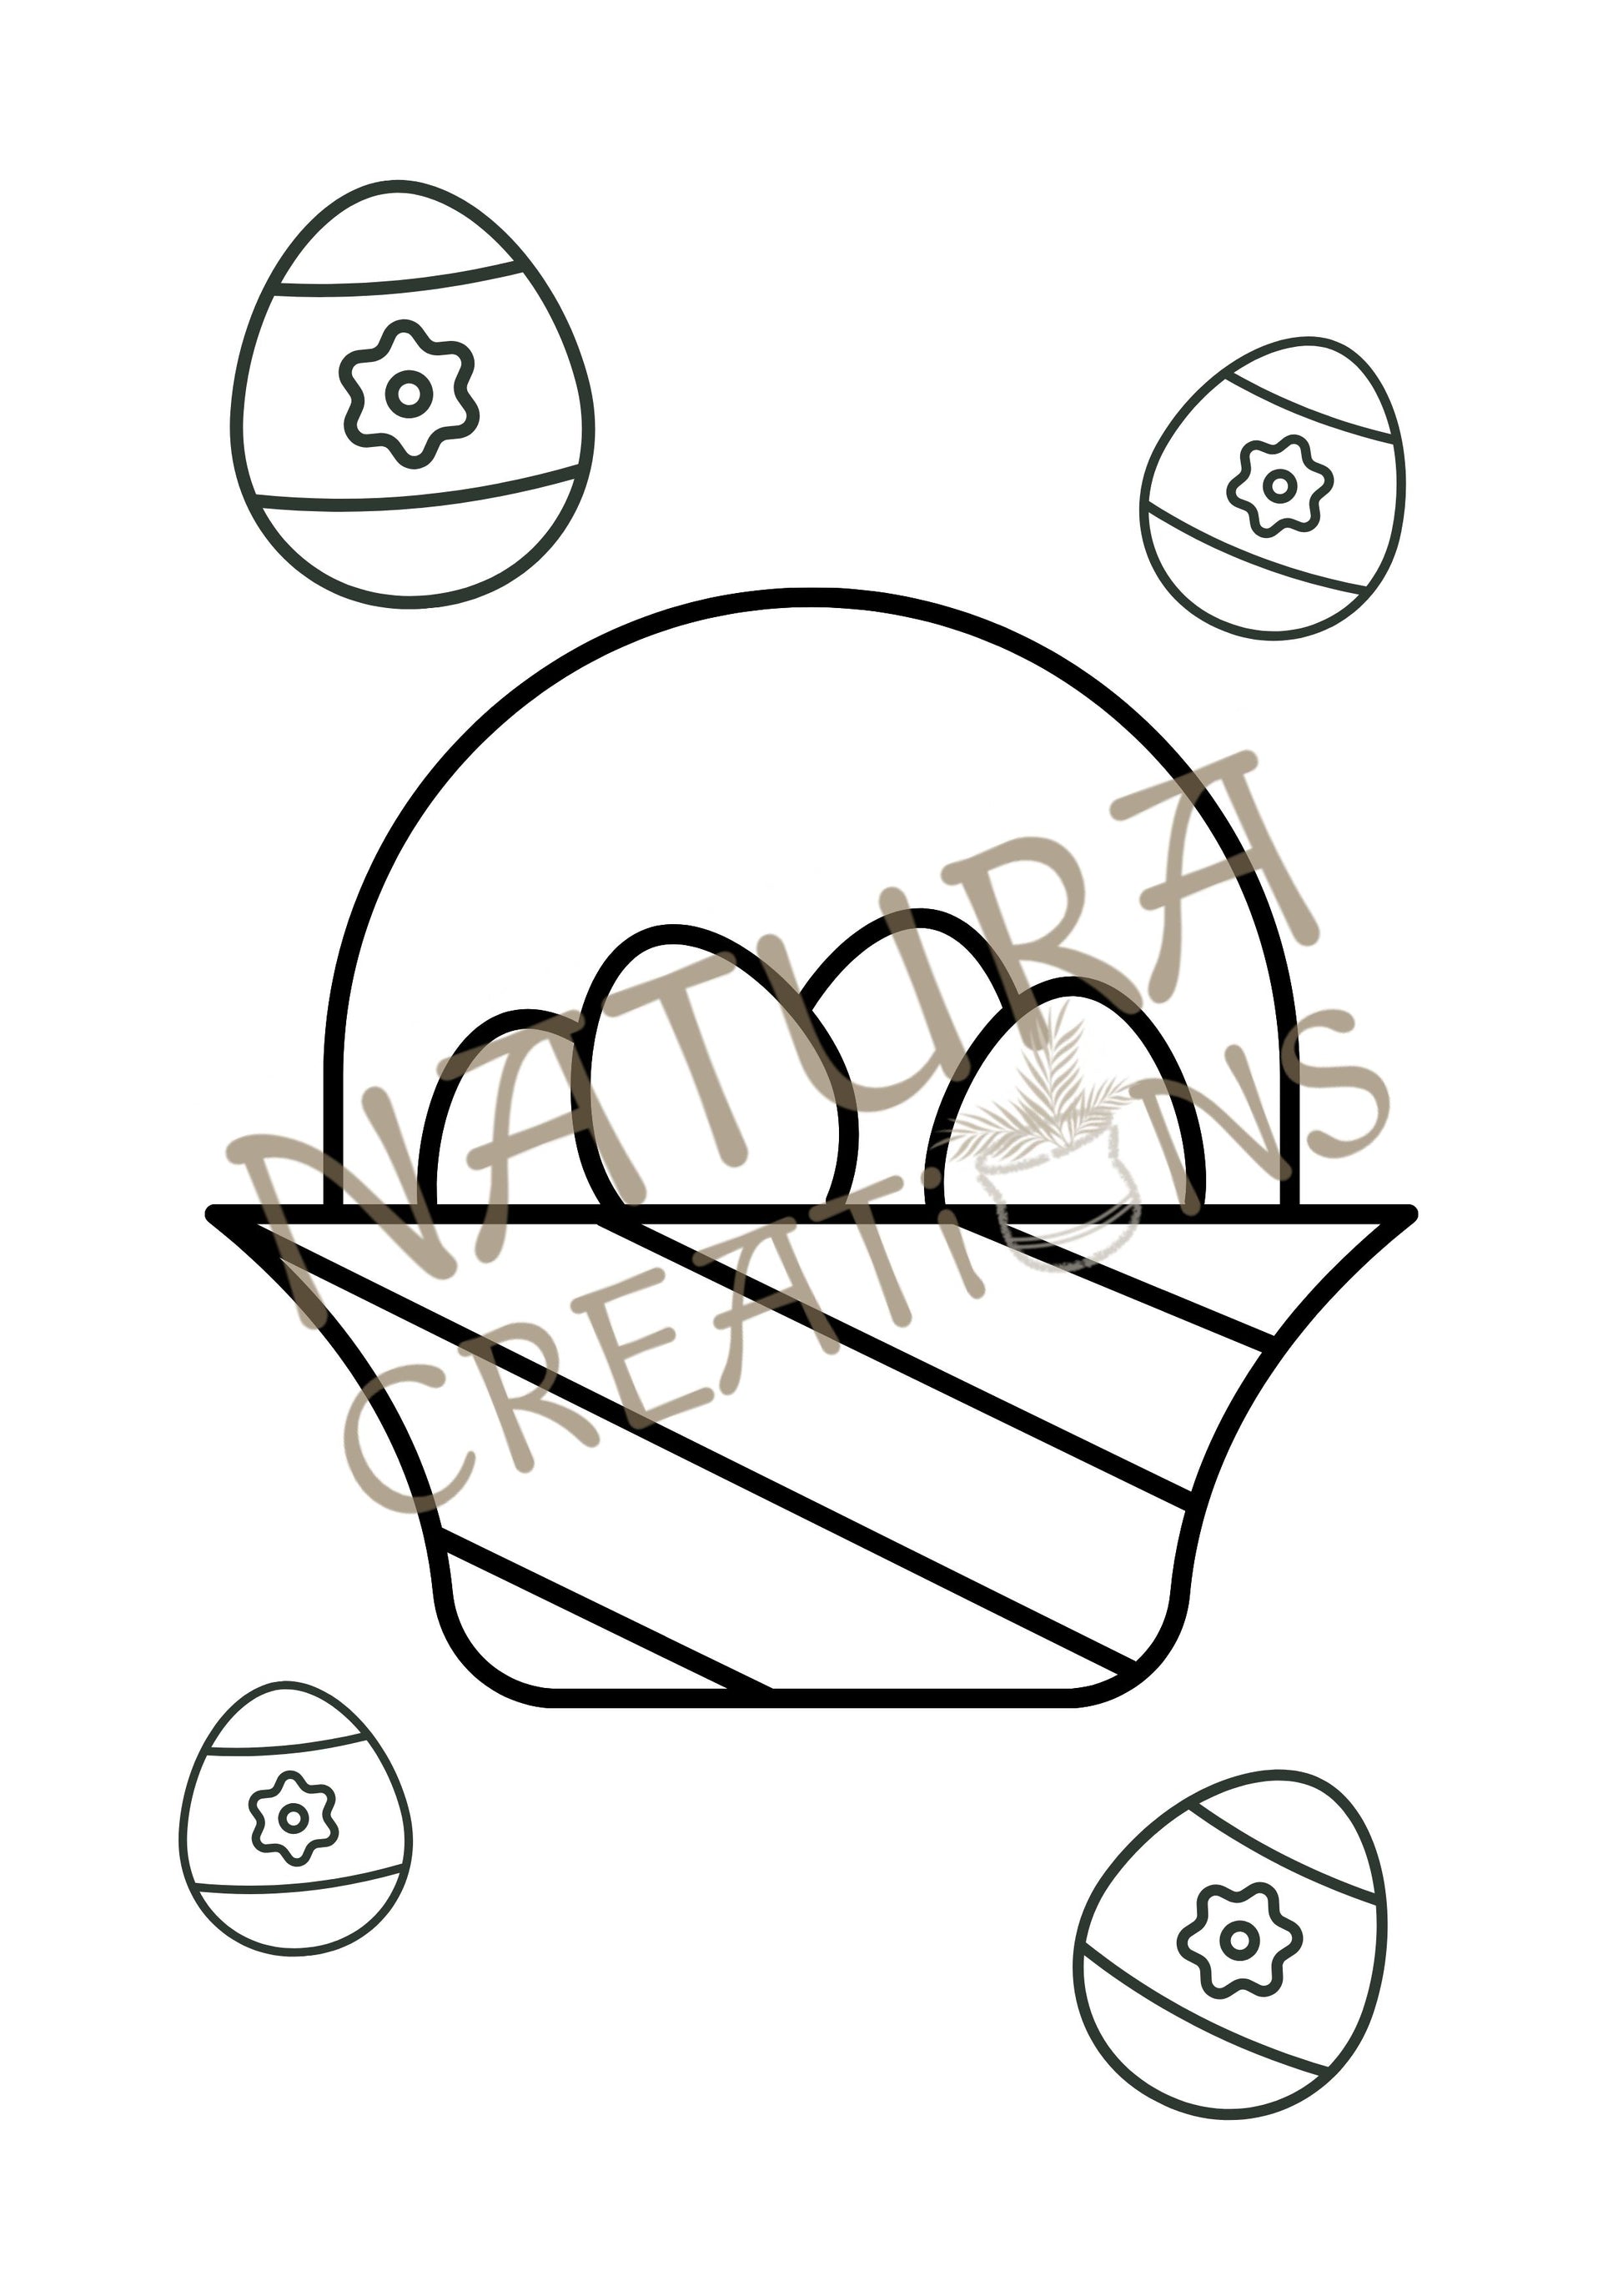 Happy Easter Coloring Pages ⪼ Instant PDF Download